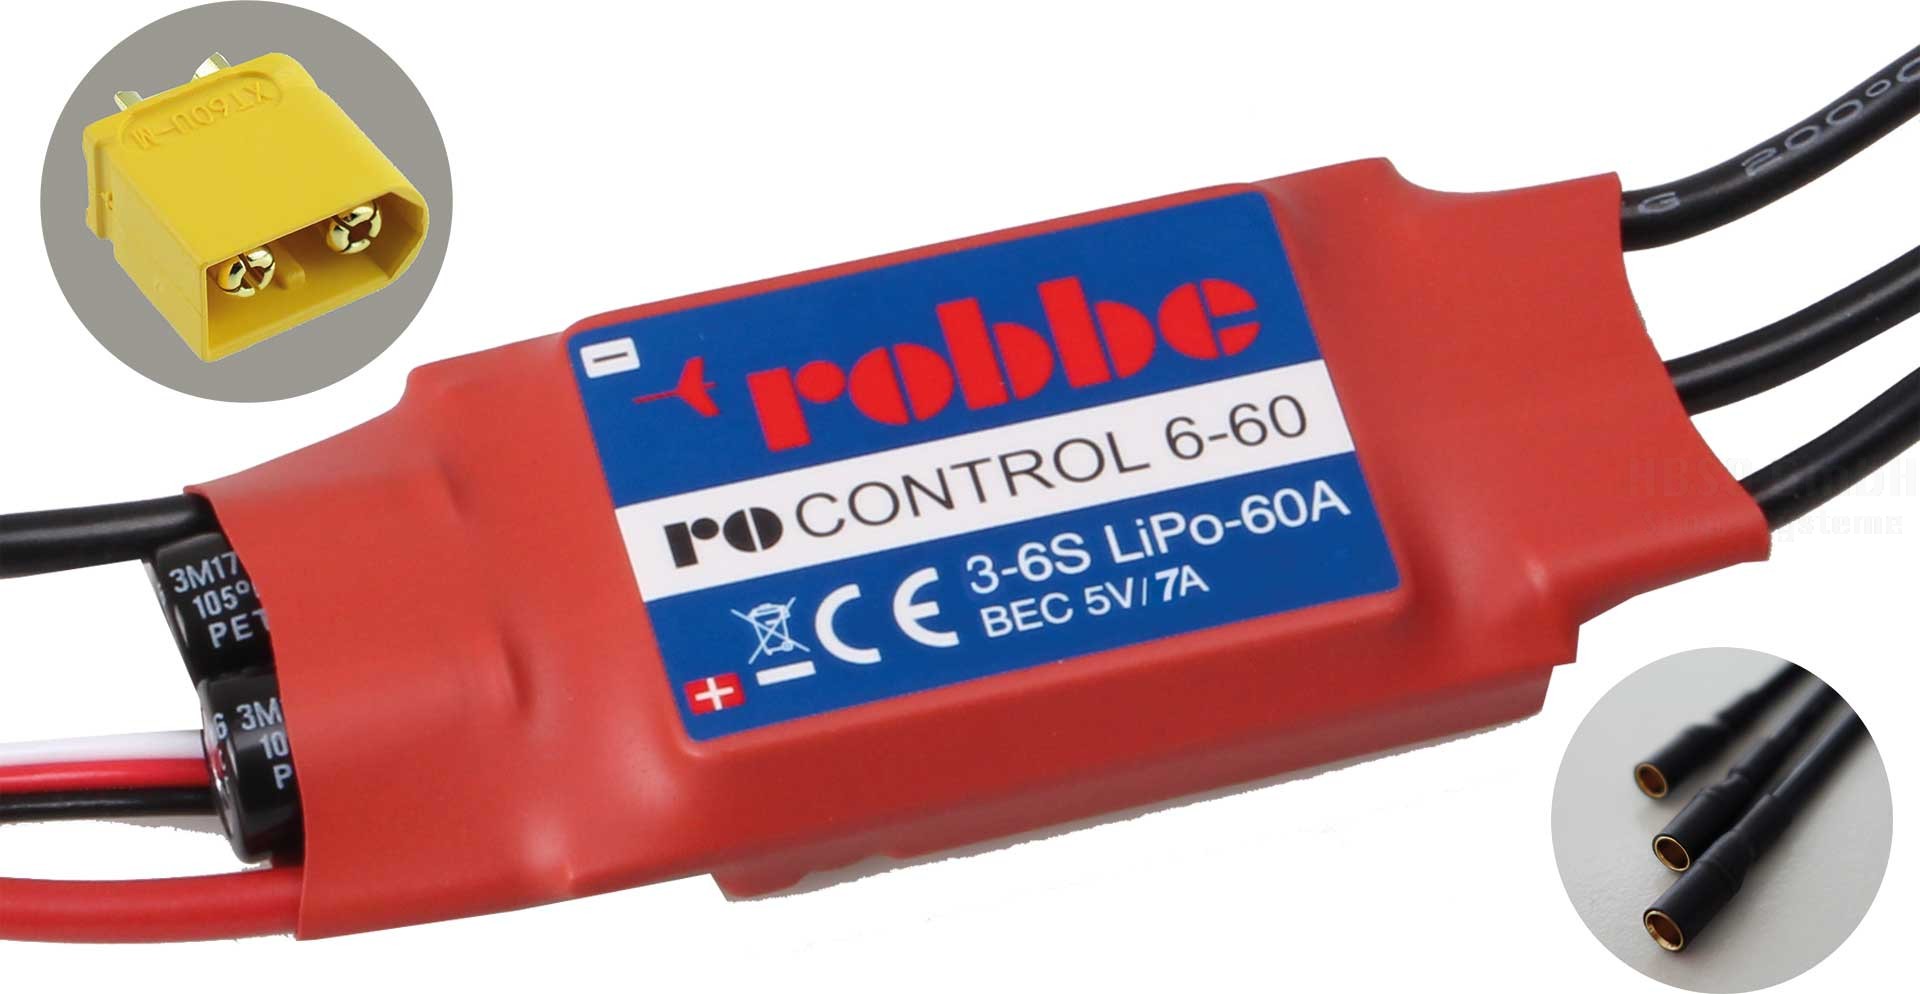 Robbe Modellsport RO-CONTROL 6-60 3-6S -60(80)A 5V/7A SWITCH BEC